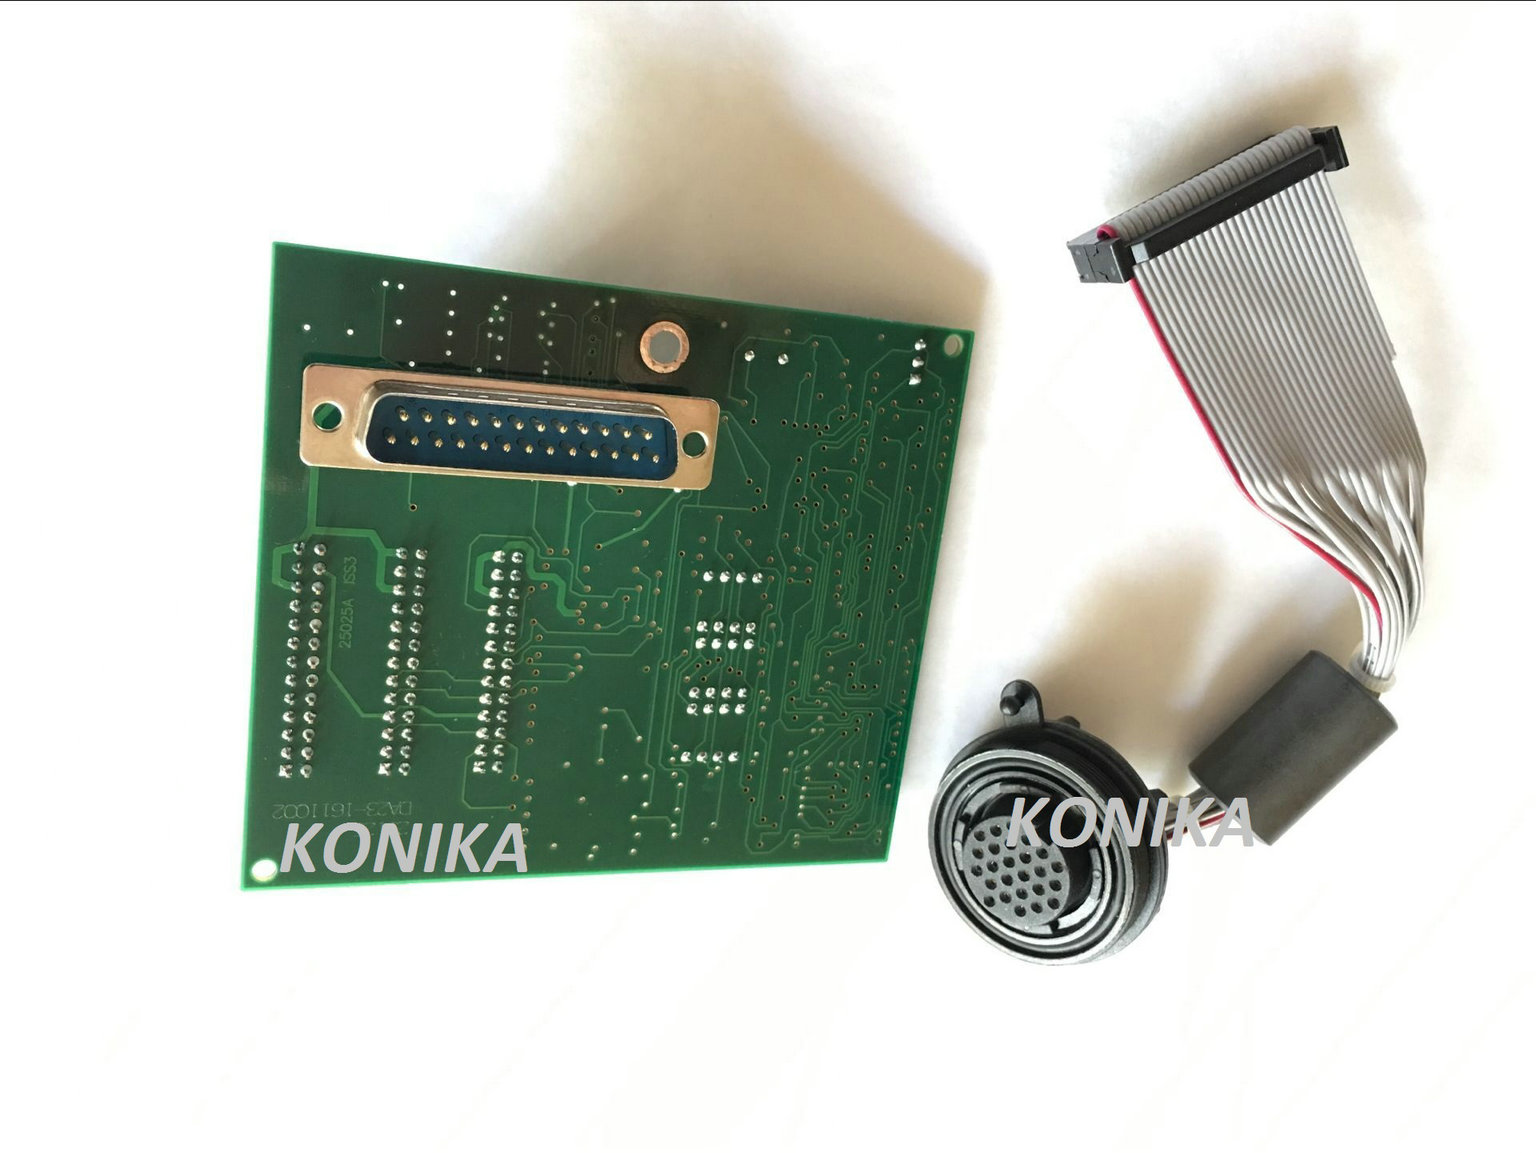 Domino 37778 user kit port for A series inkjet printer Featured Image